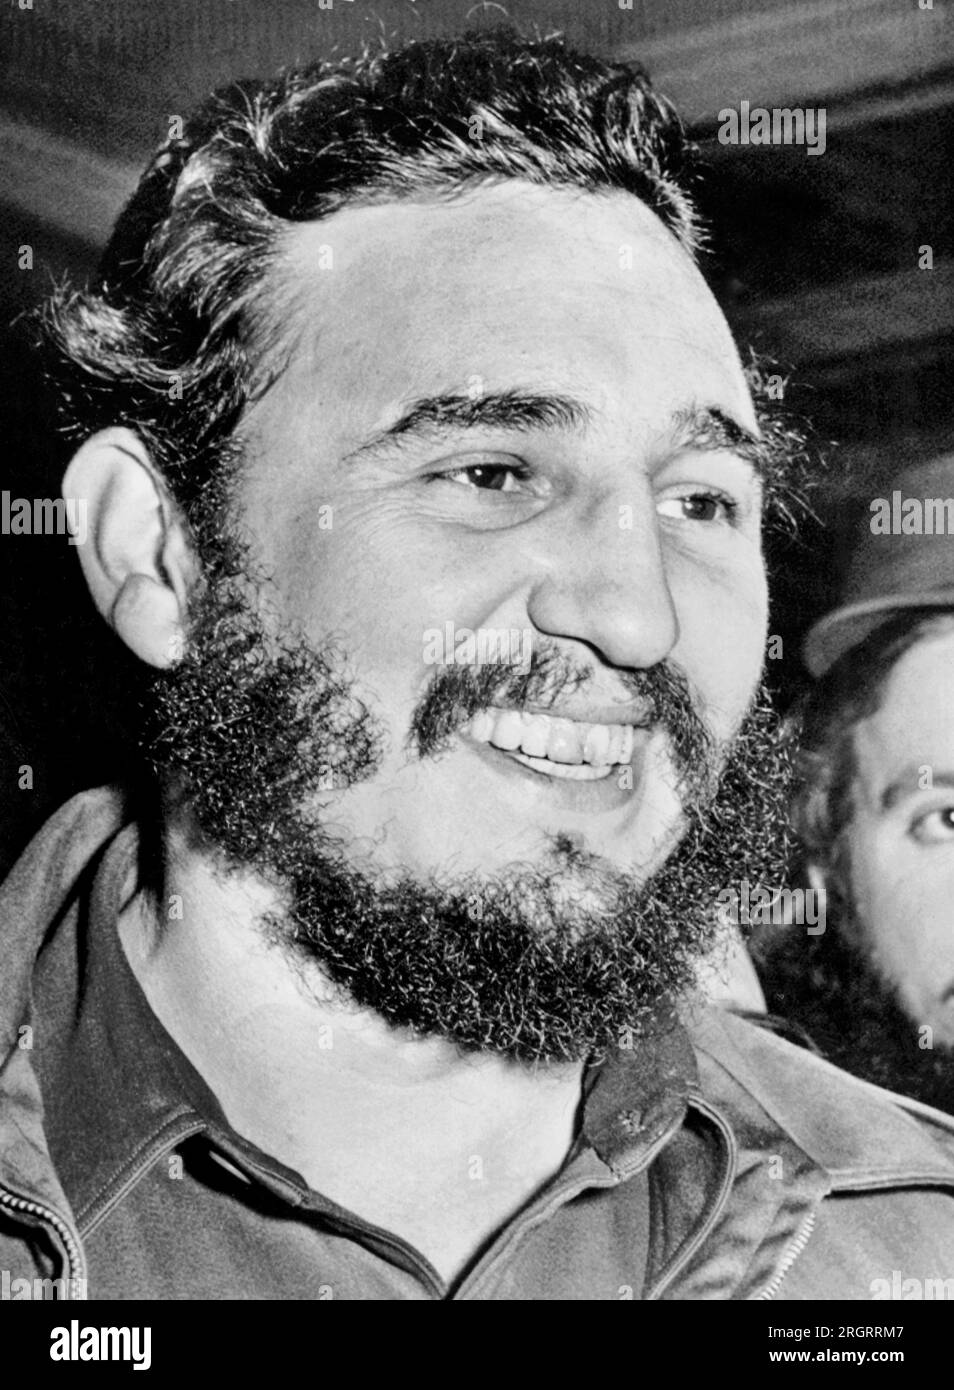 Washington, D.C.:  April 17, 1959 Cuban Prime Minister Fidel Castro is all smiles as he walks into the Cuban Embassy after an enthusiastic reception from a small crowd at the D.C. airport. Stock Photo